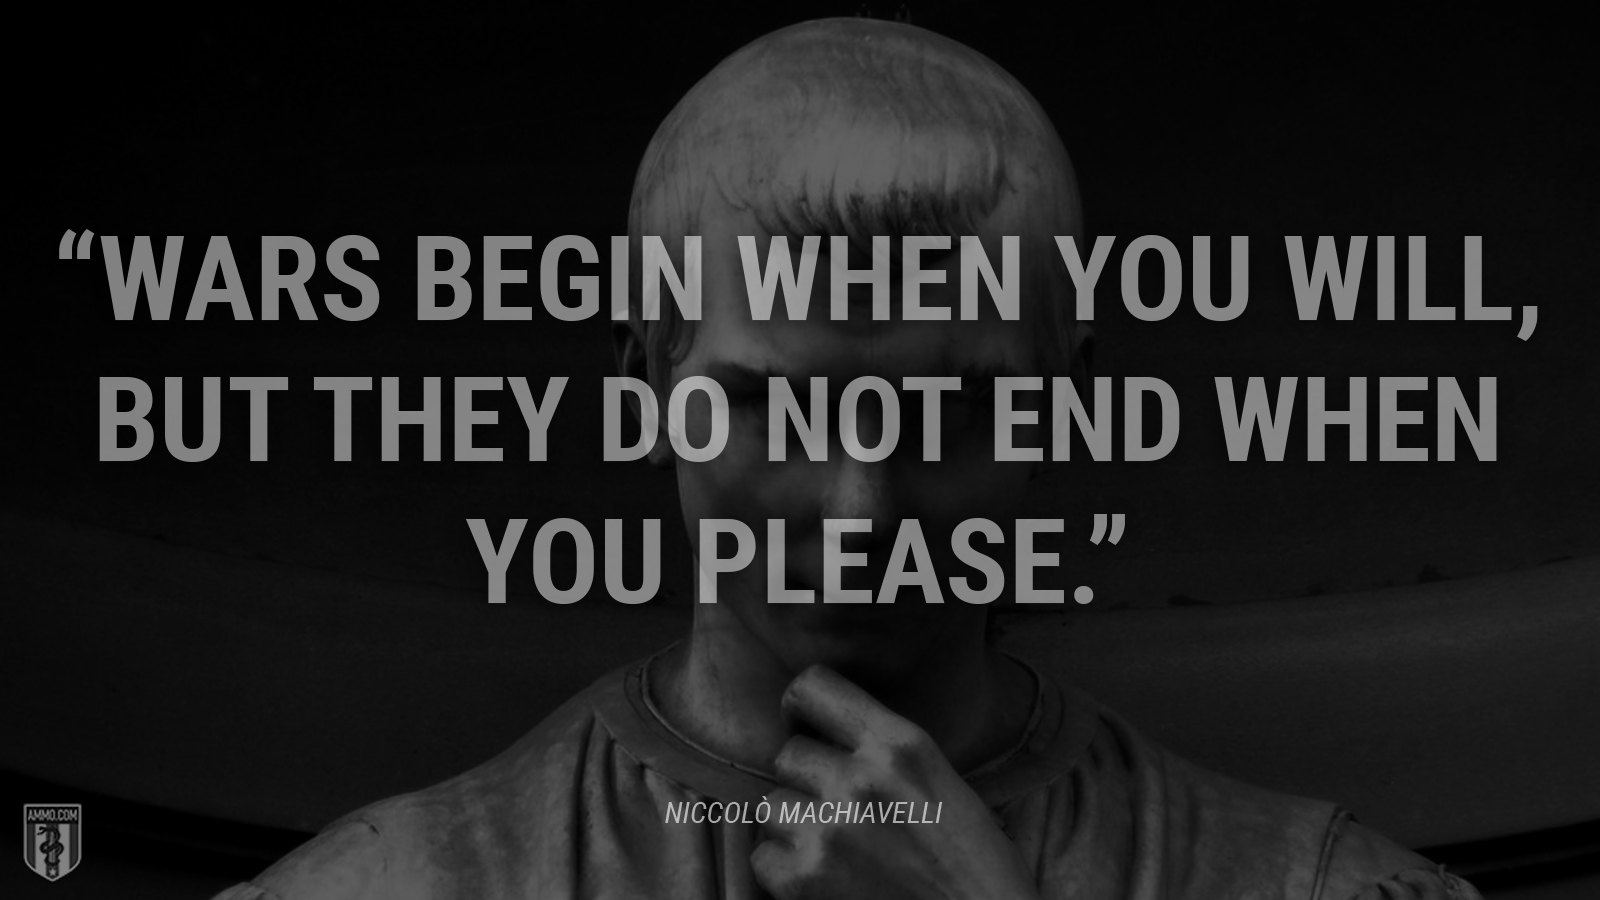 “Wars begin when you will, but they do not end when you please.” - Niccolò Machiavelli